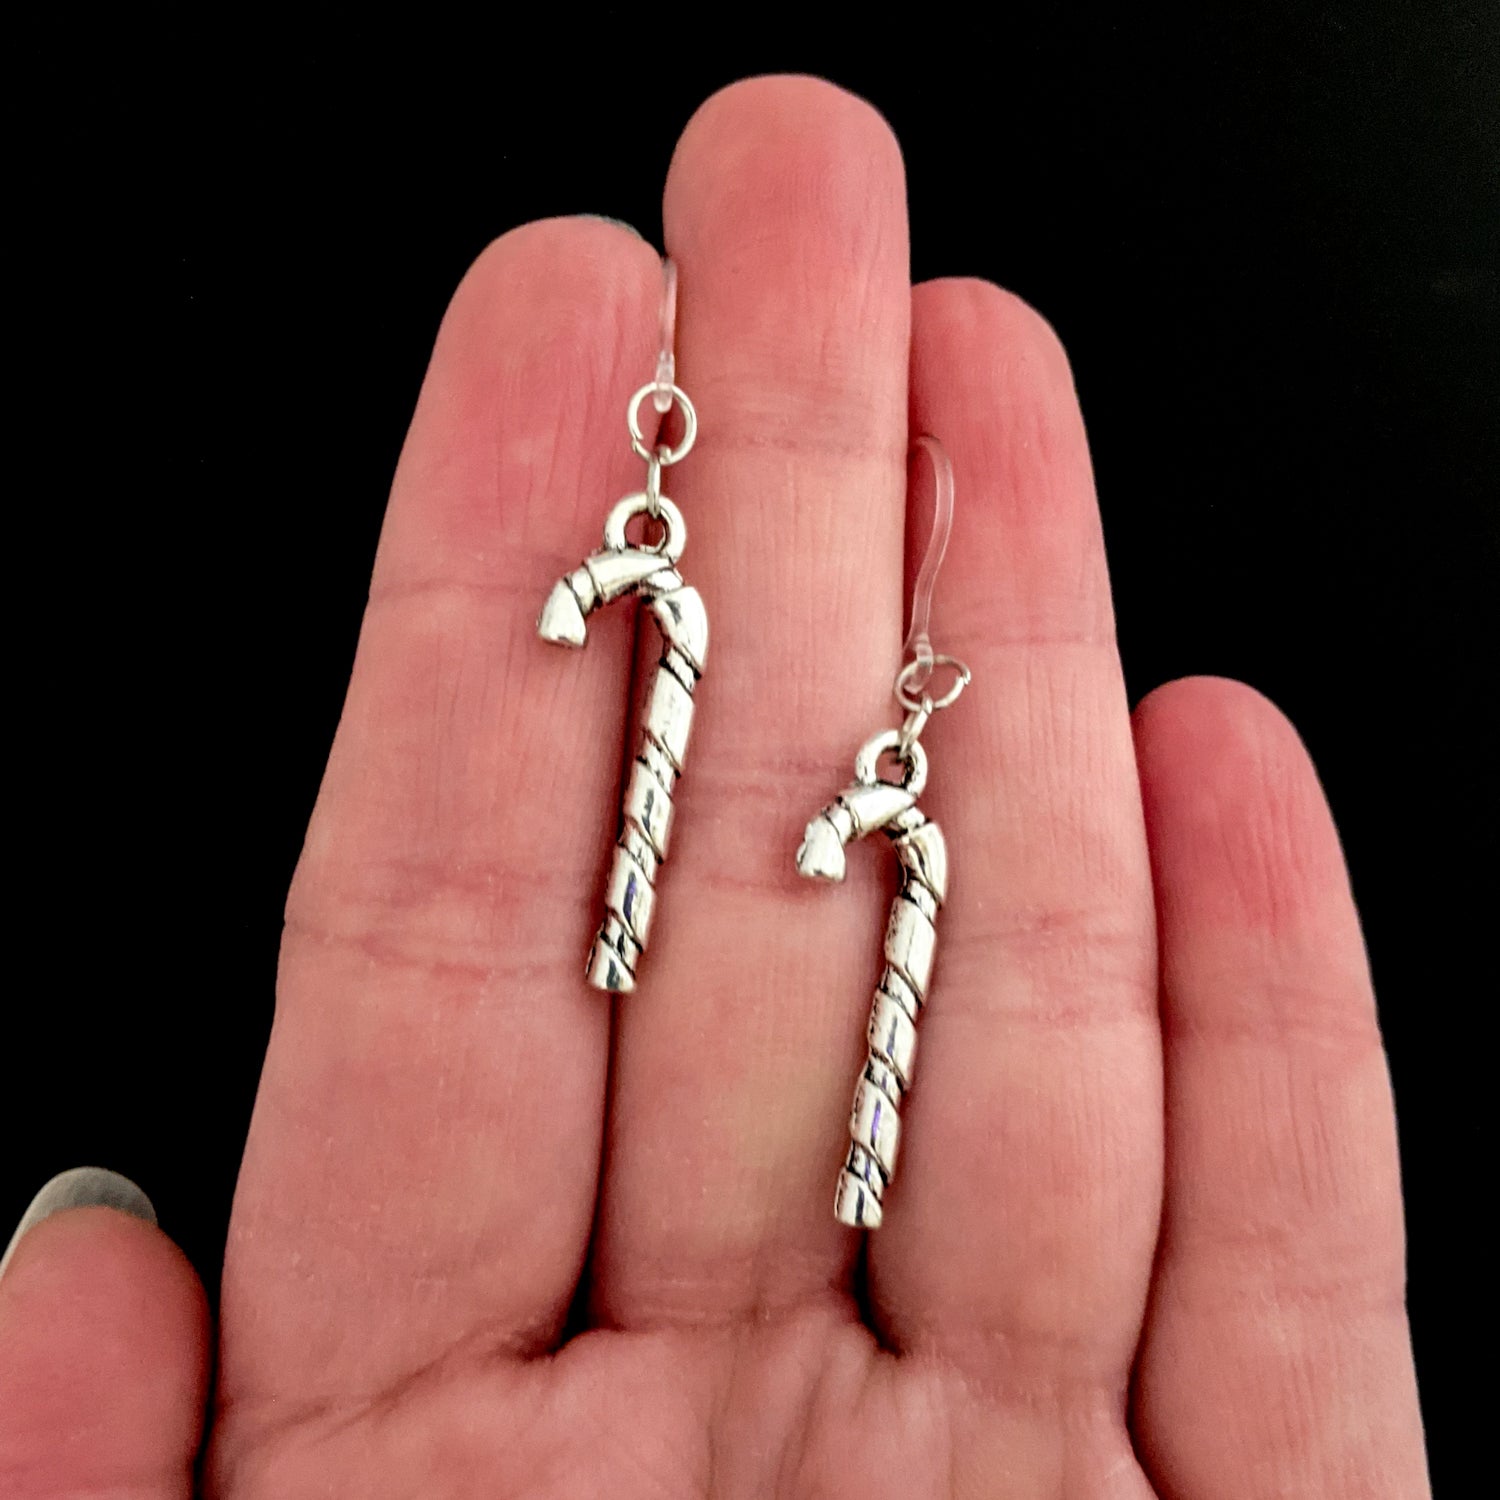 Silver Candy Cane Earrings (Dangles) - size comparison hand